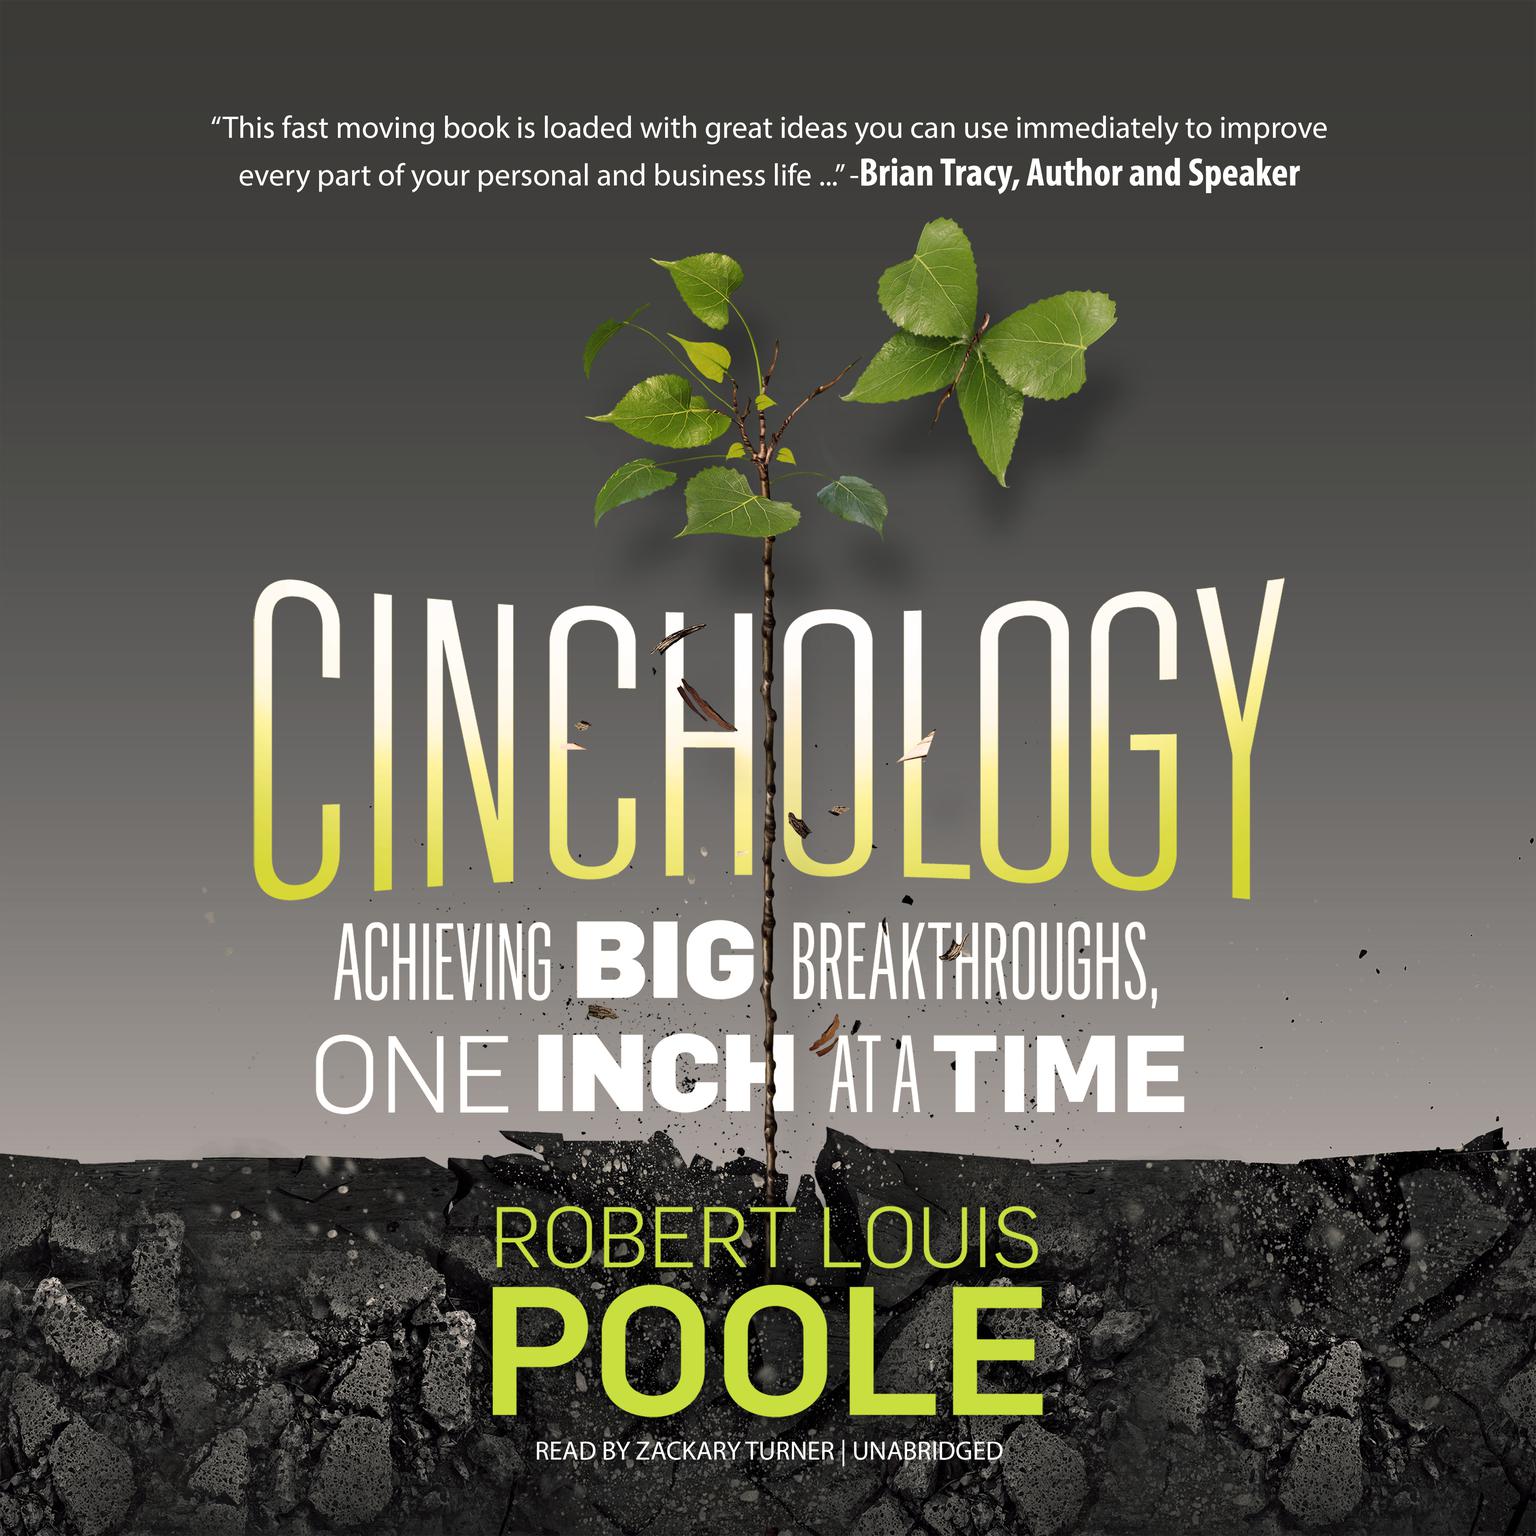 Cinchology: Achieving BIG Breakthroughs, One Inch at a Time Audiobook, by Robert Louis Poole